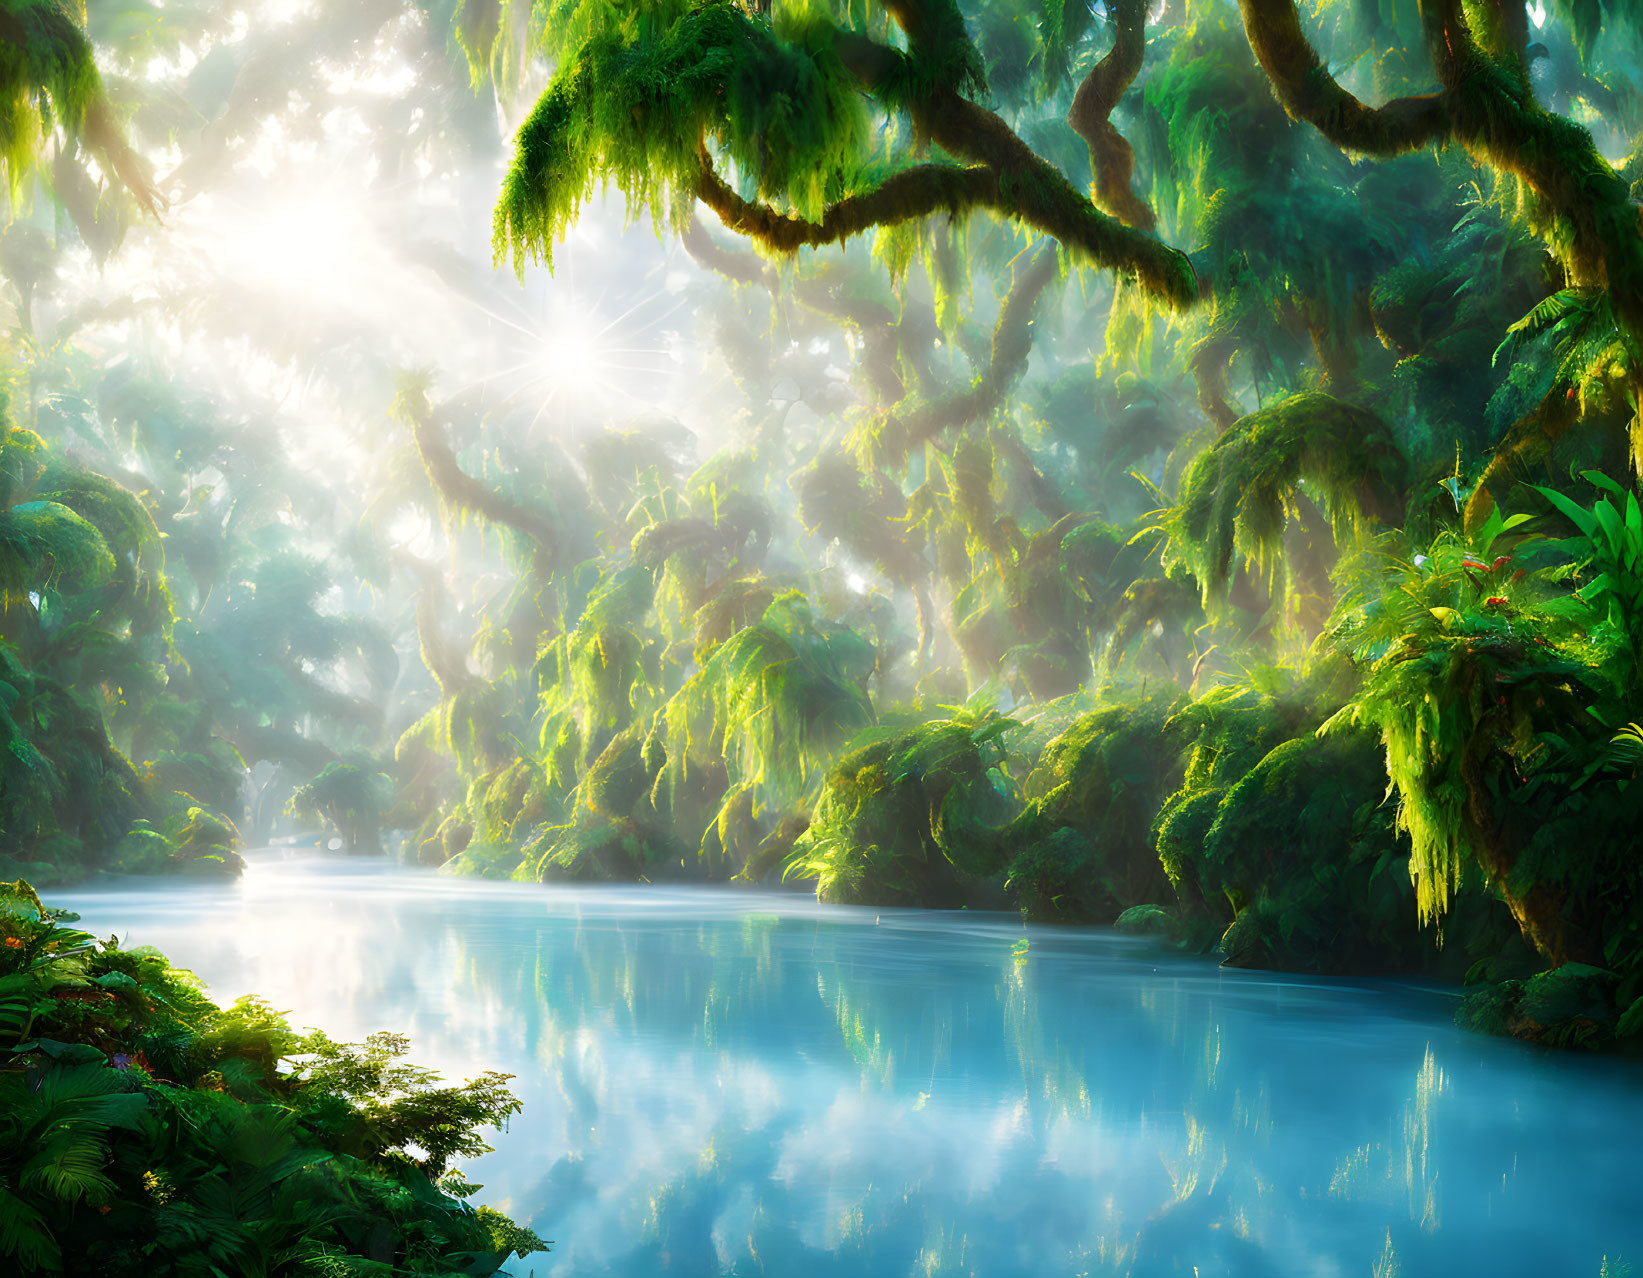 Serene green forest with hanging moss, ferns, and blue river